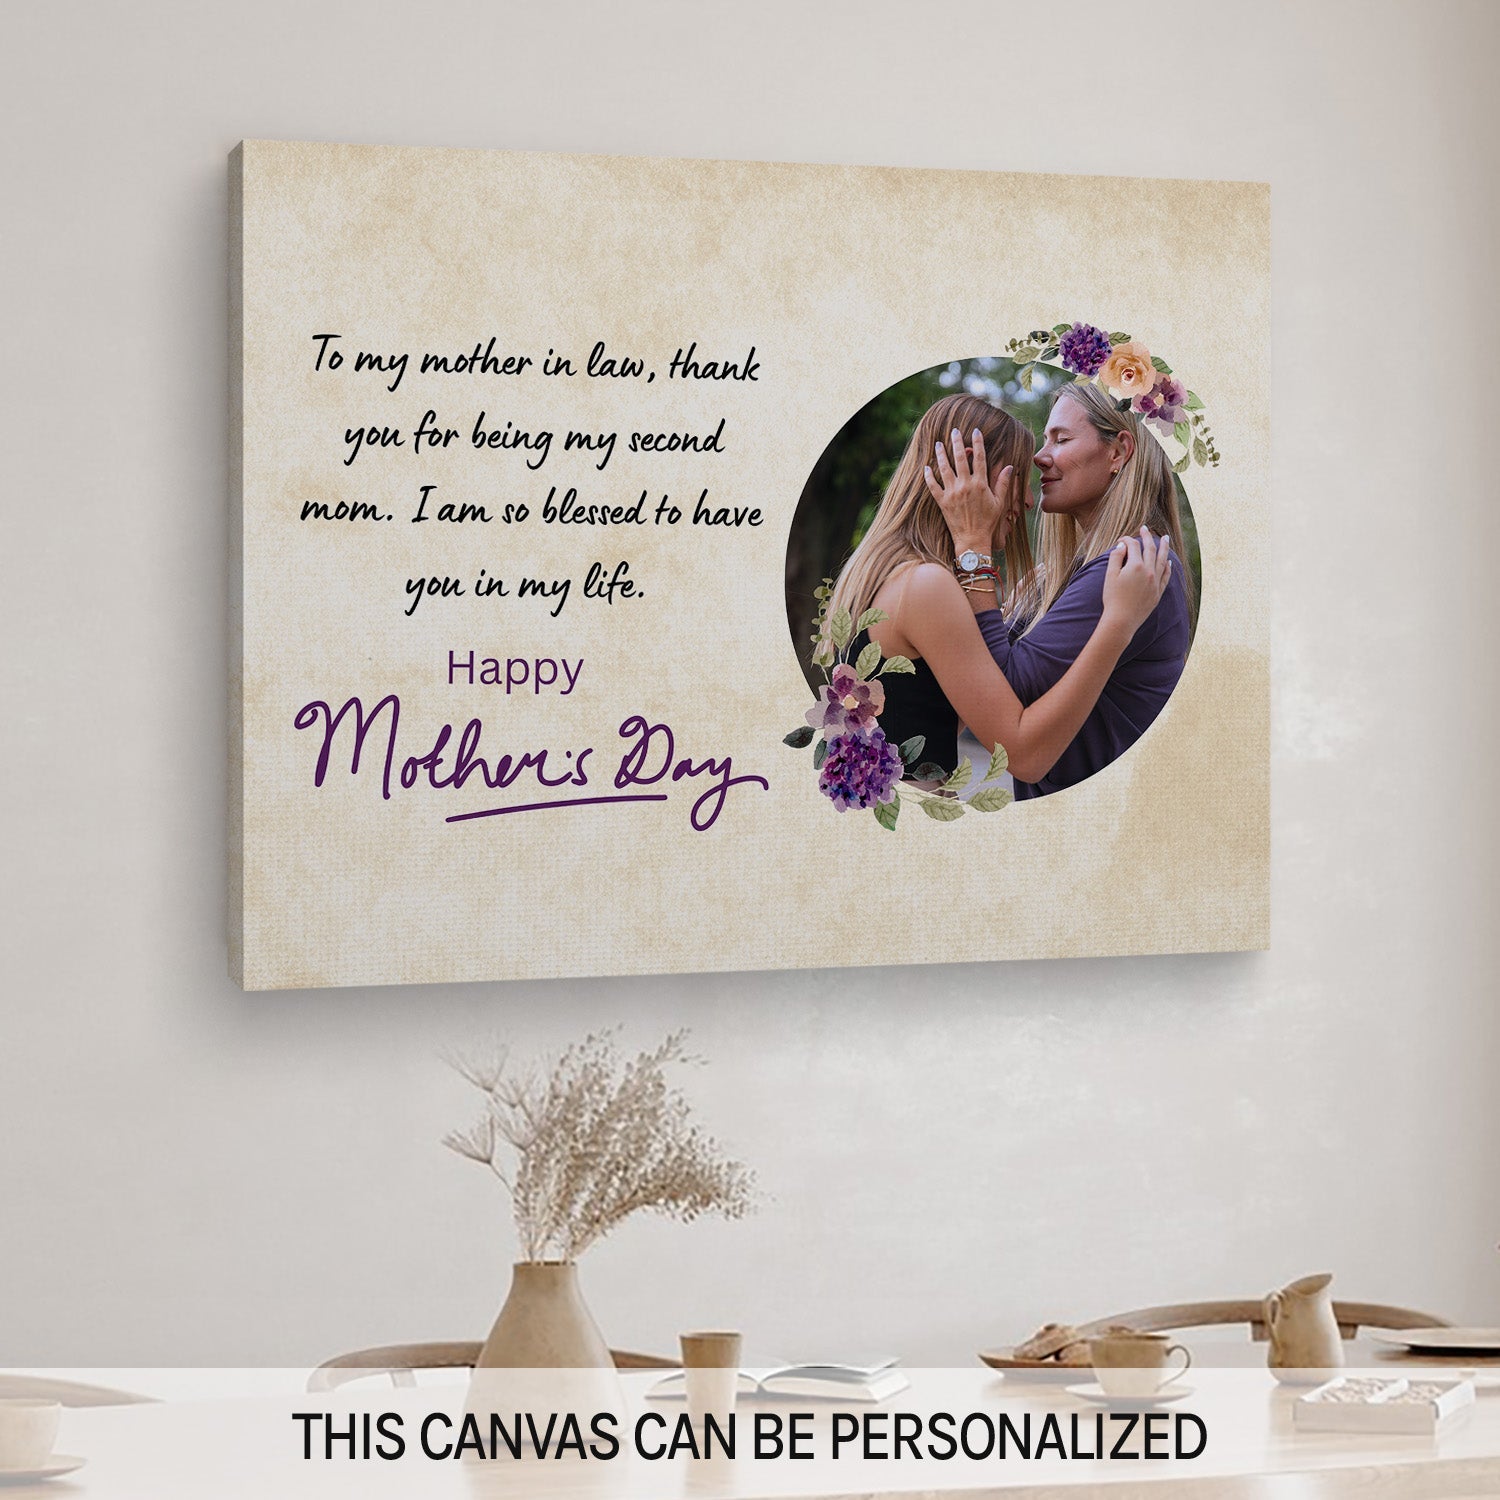 Personalized Mother's Day gift for Mother in law - To My Mother In Law - custom Canvas Print - MyMindfulGifts